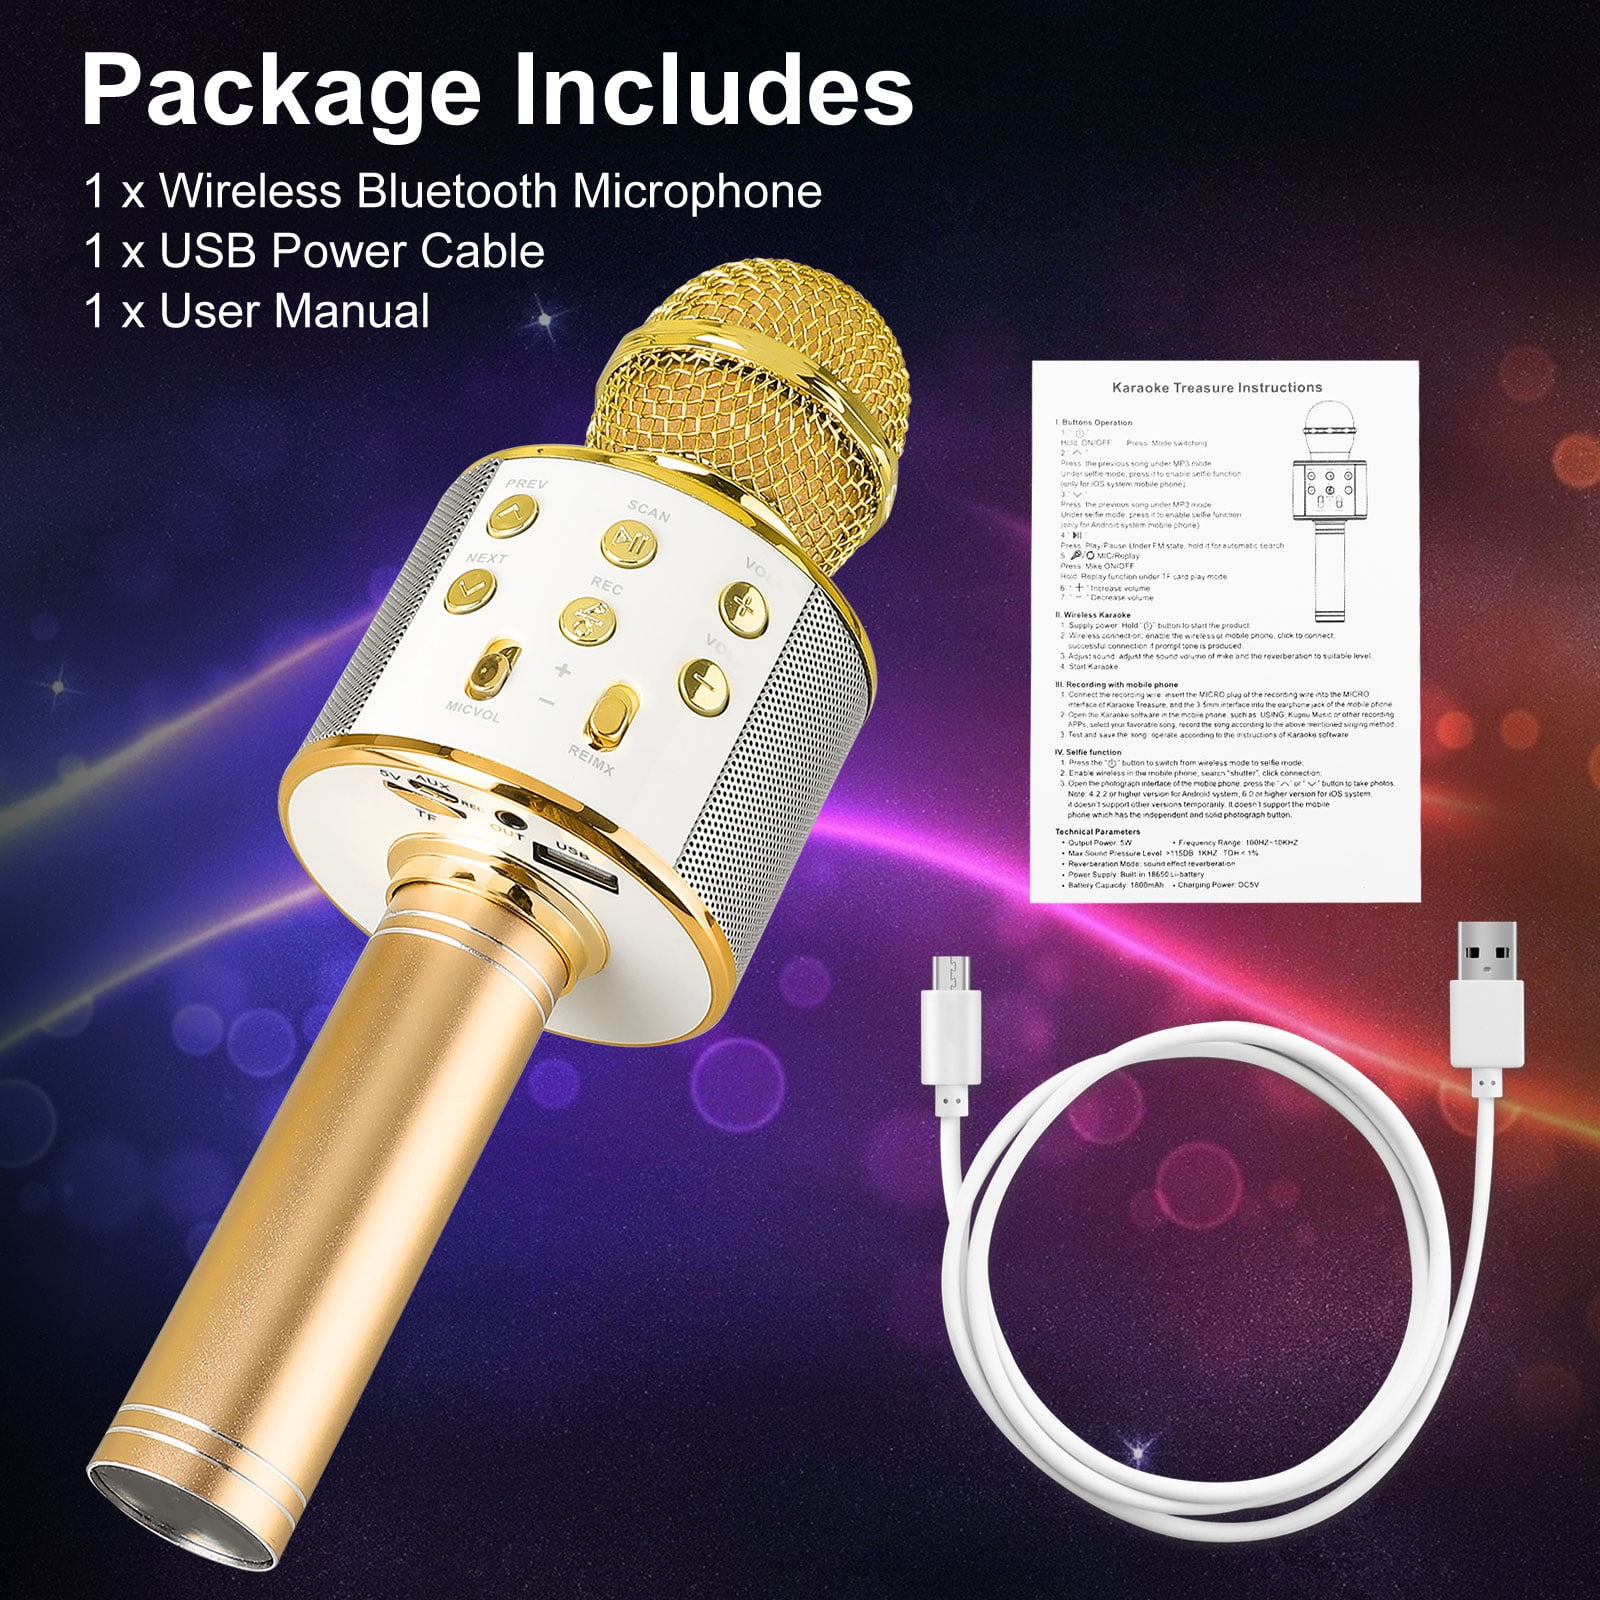 Gold） 4 in 1 Portable Handheld Karaoke Speaker Machine Thanksgiving Day for Android/iPhone/iPad/Sony/PC or All Smartphone SLKIJDHFB Wireless Bluetooth Karaoke Microphone with Multi-color LED Lights 